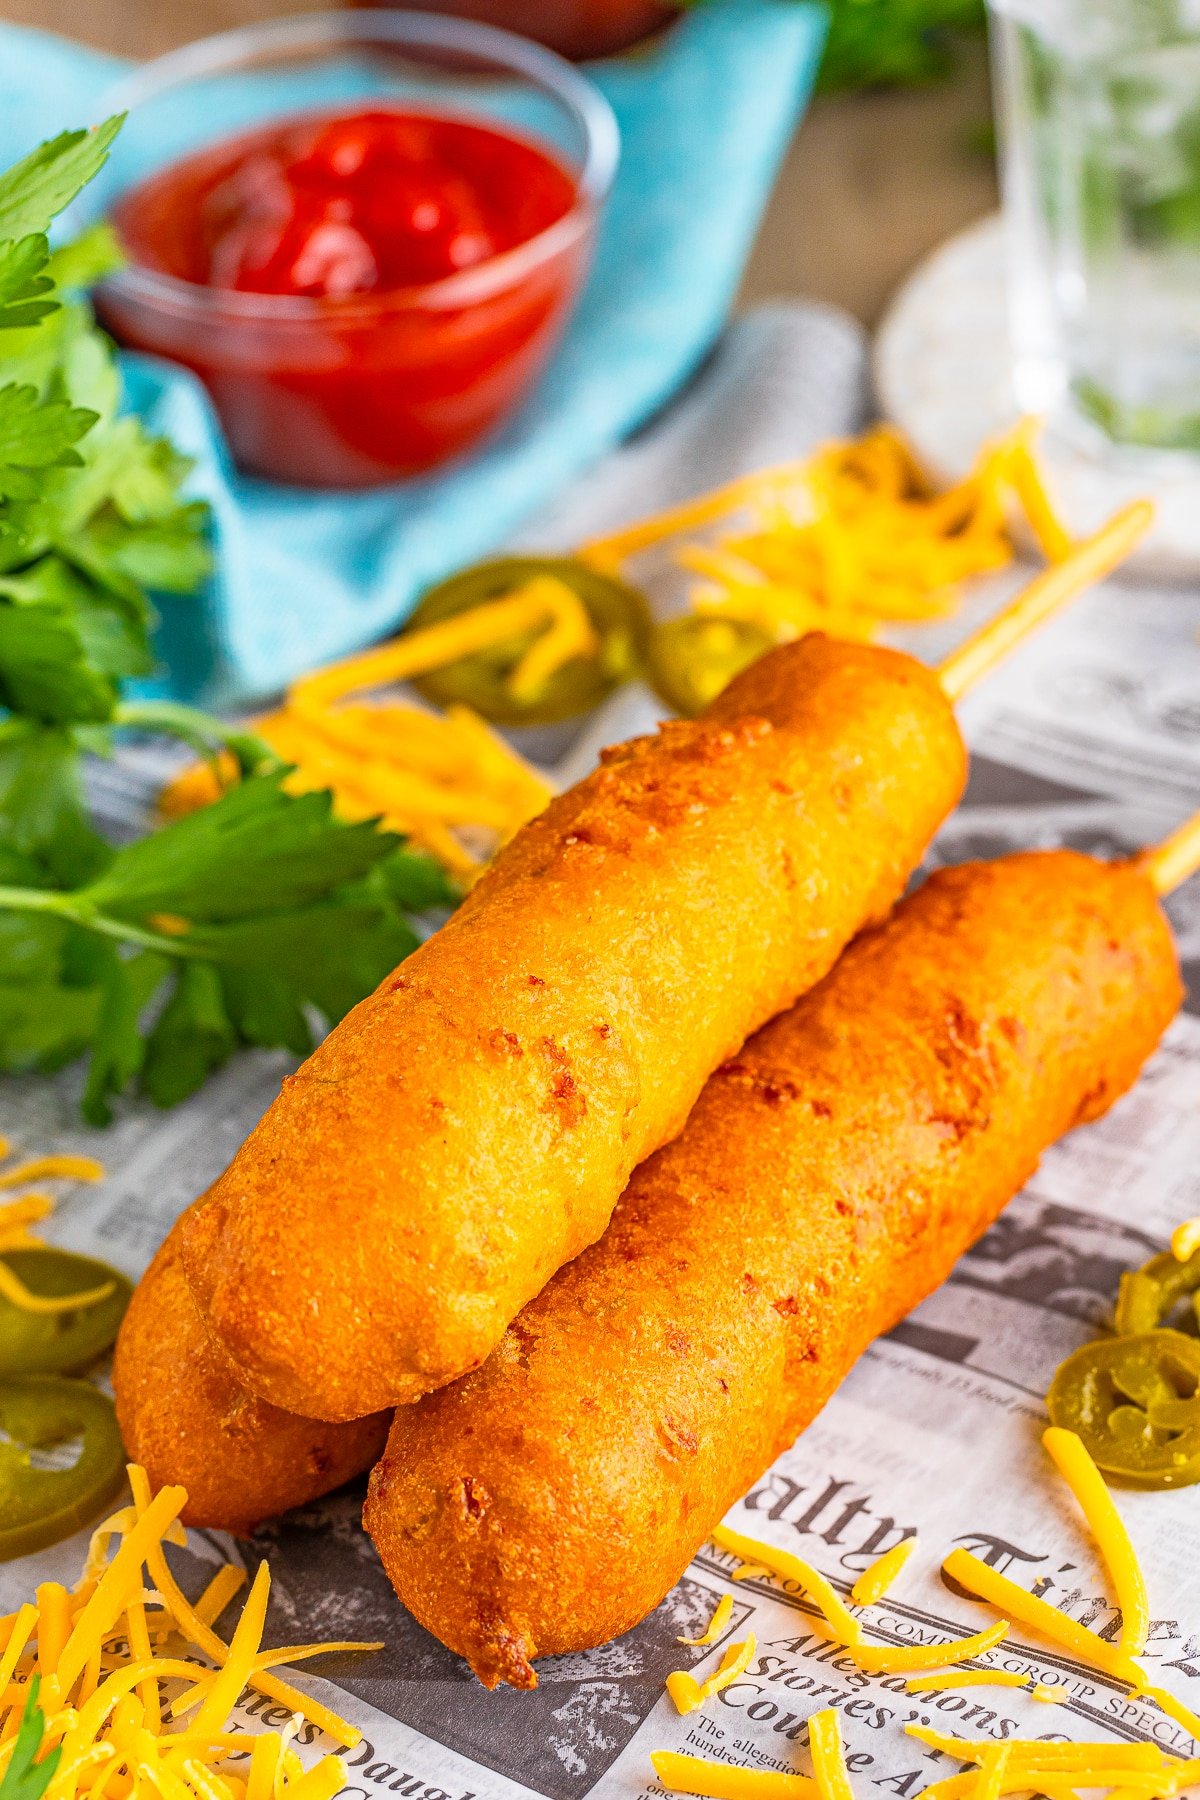 3 corn dogs recipe stacked on newspaper